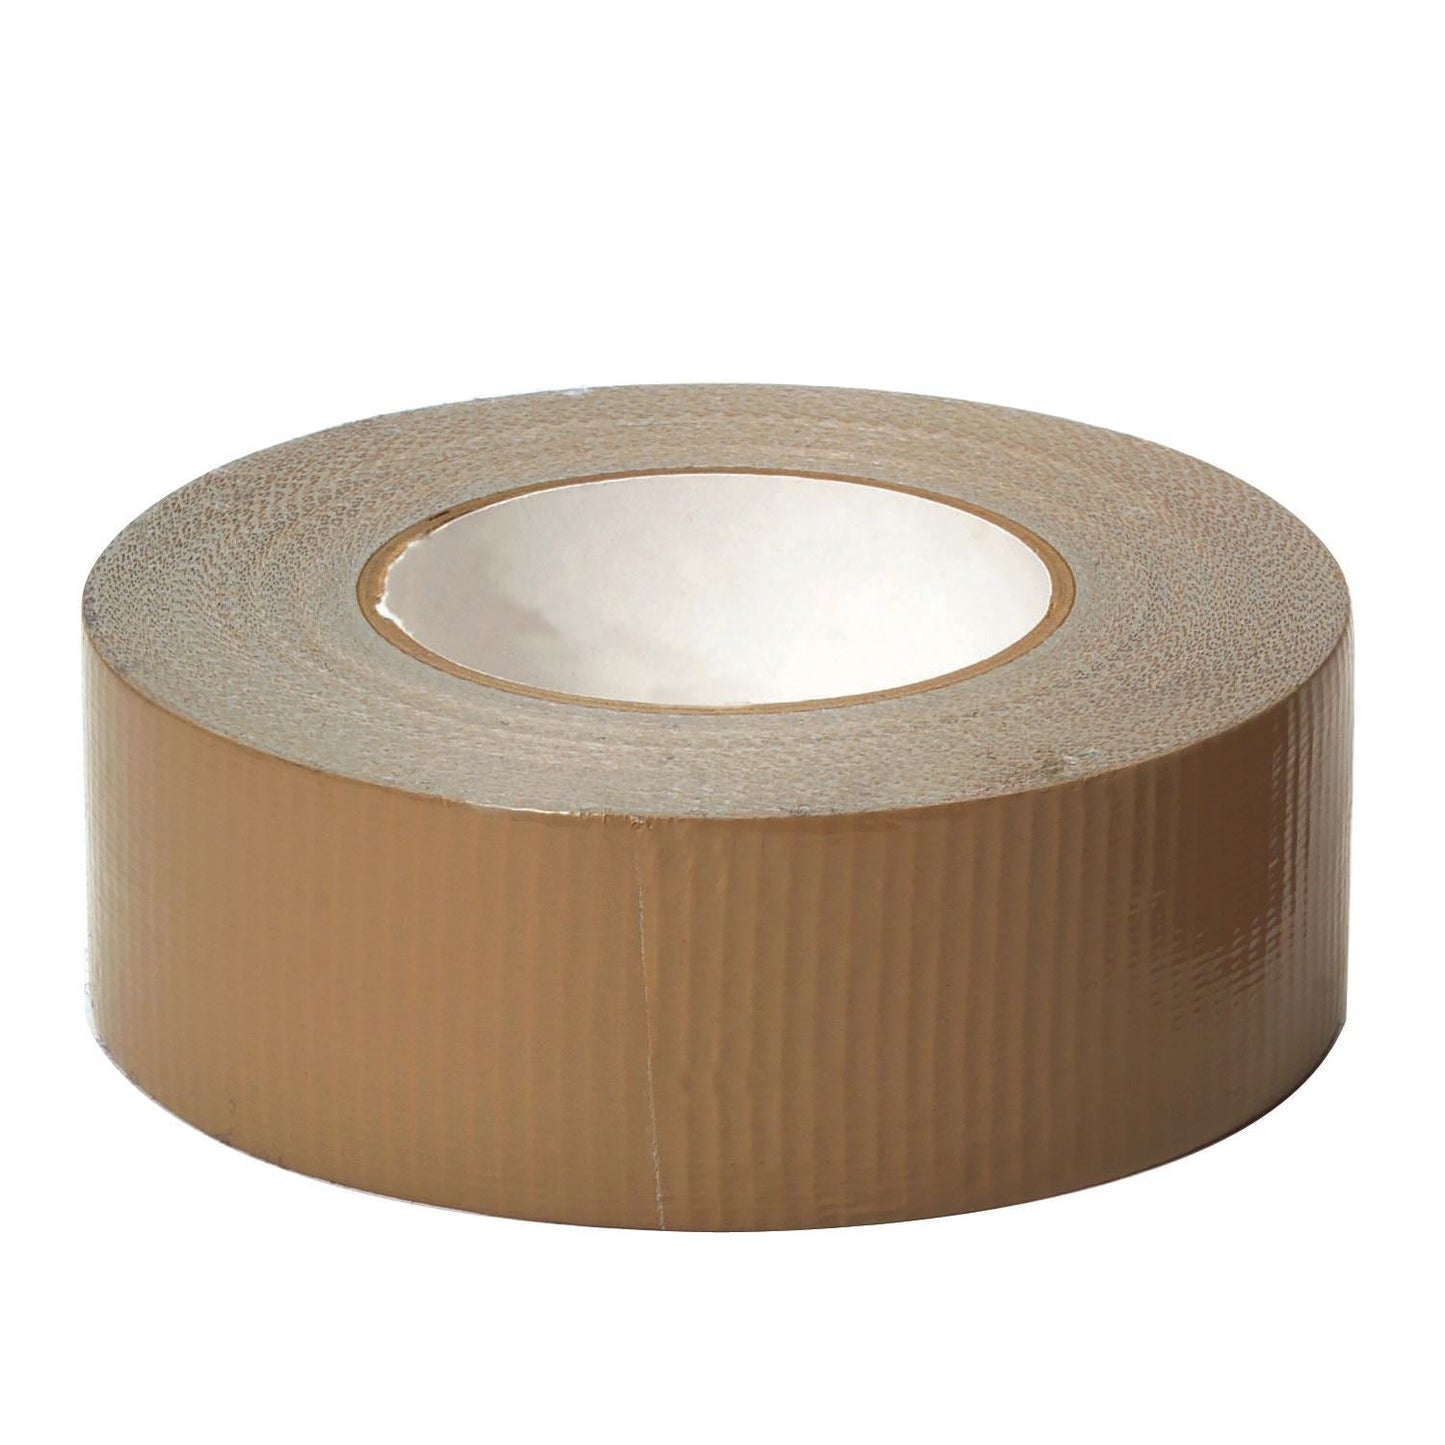 Military Duct Tape AKA 100 Mile An Hour Tape - Coyote Brown, (5 Per Pack)